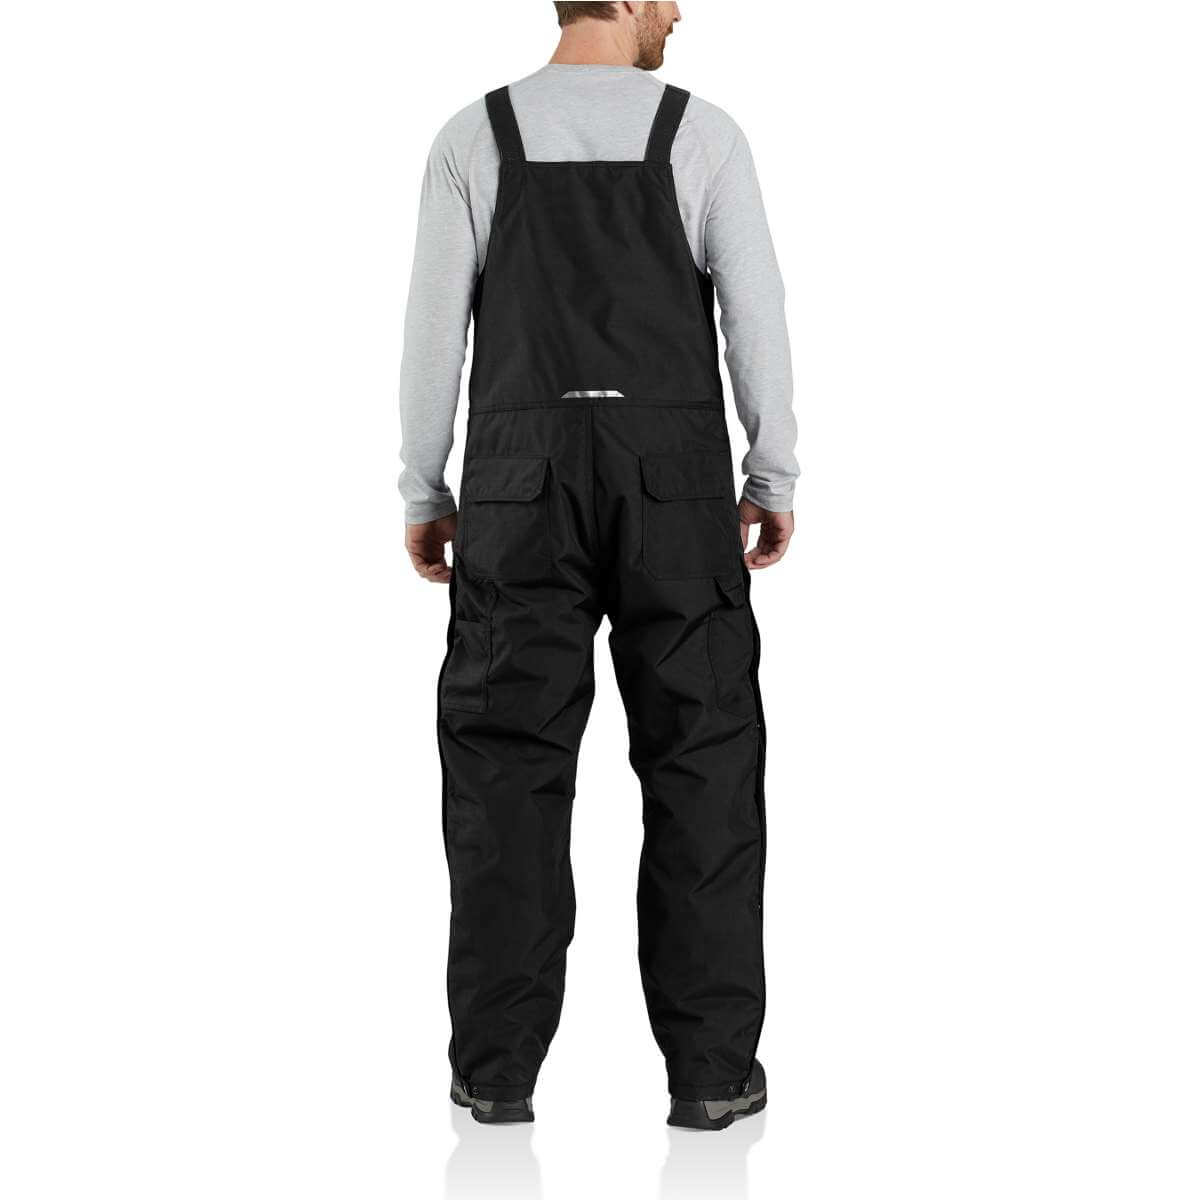 104461 - Carhartt Men's Yukon Extremes Loose Fit Insulated Biberall